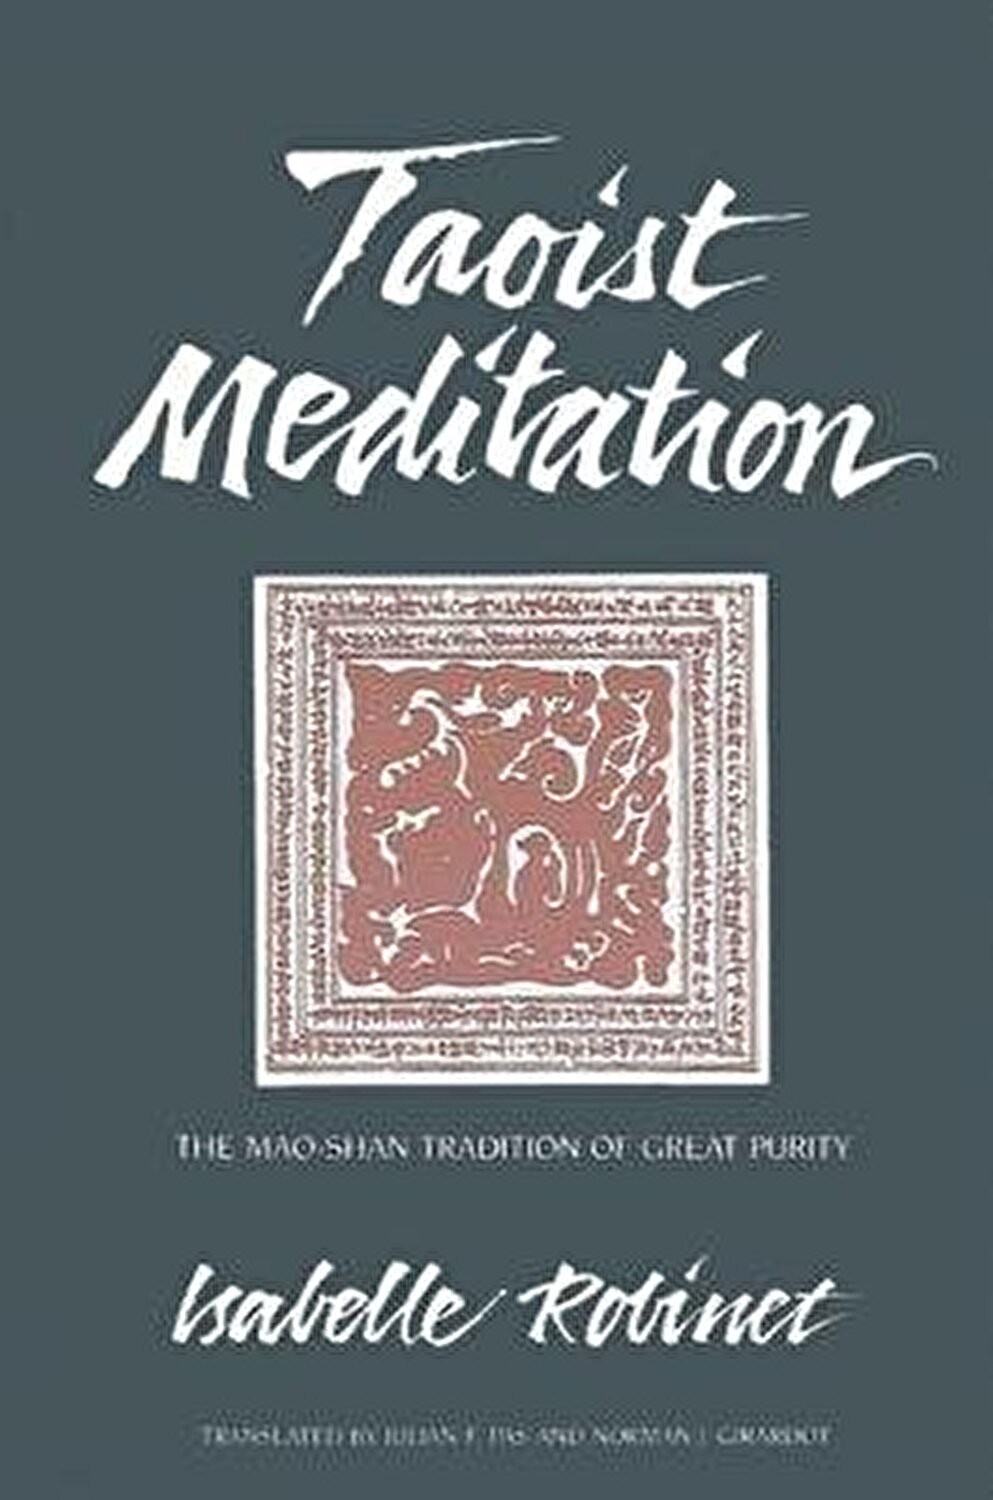 Taoist Meditation: The Mao-Shan Tradition of Great Purity